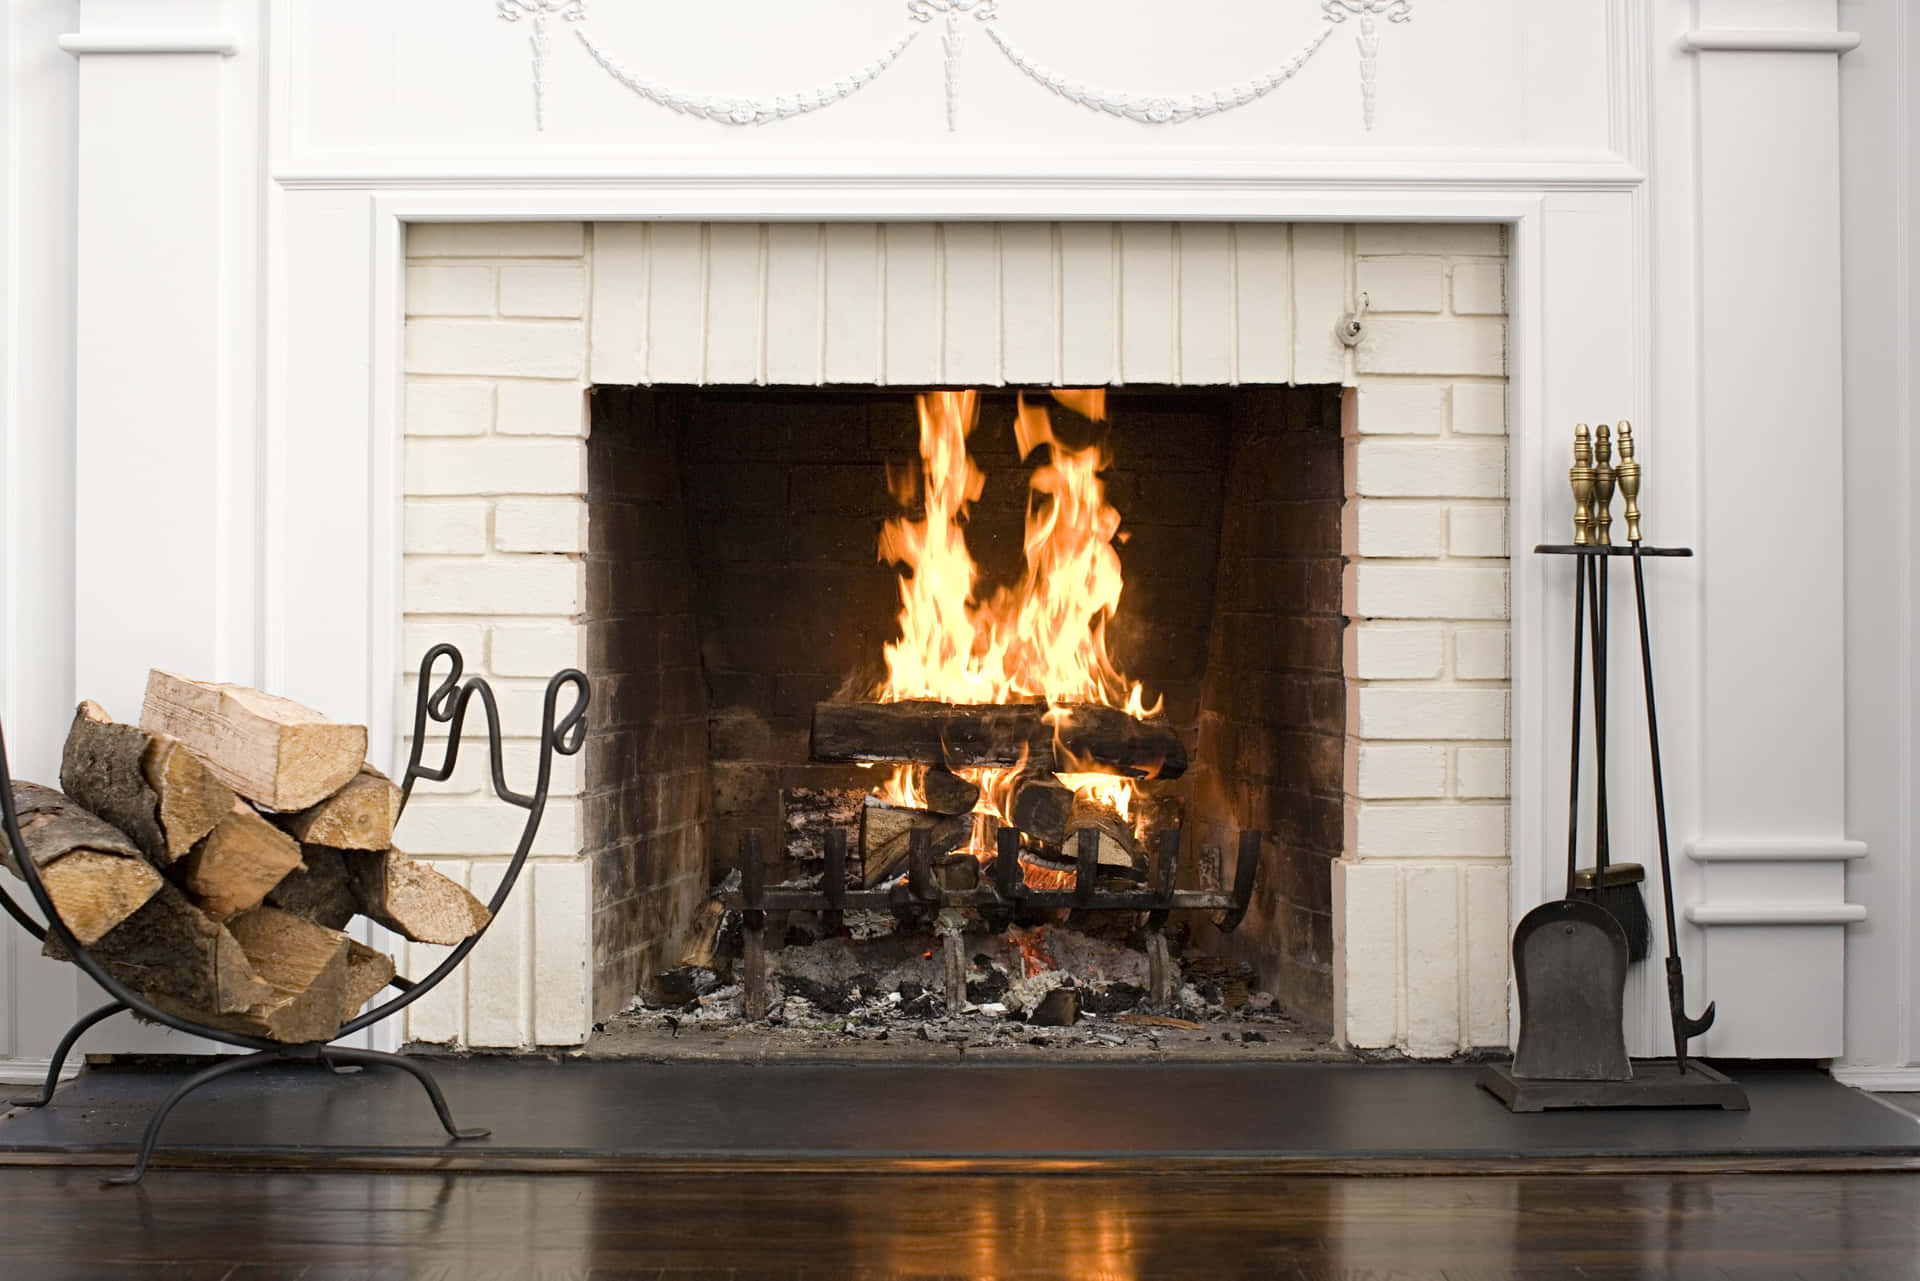 Enjoy the warmth of a cozy crackling fire in a beautiful stone fireplace.